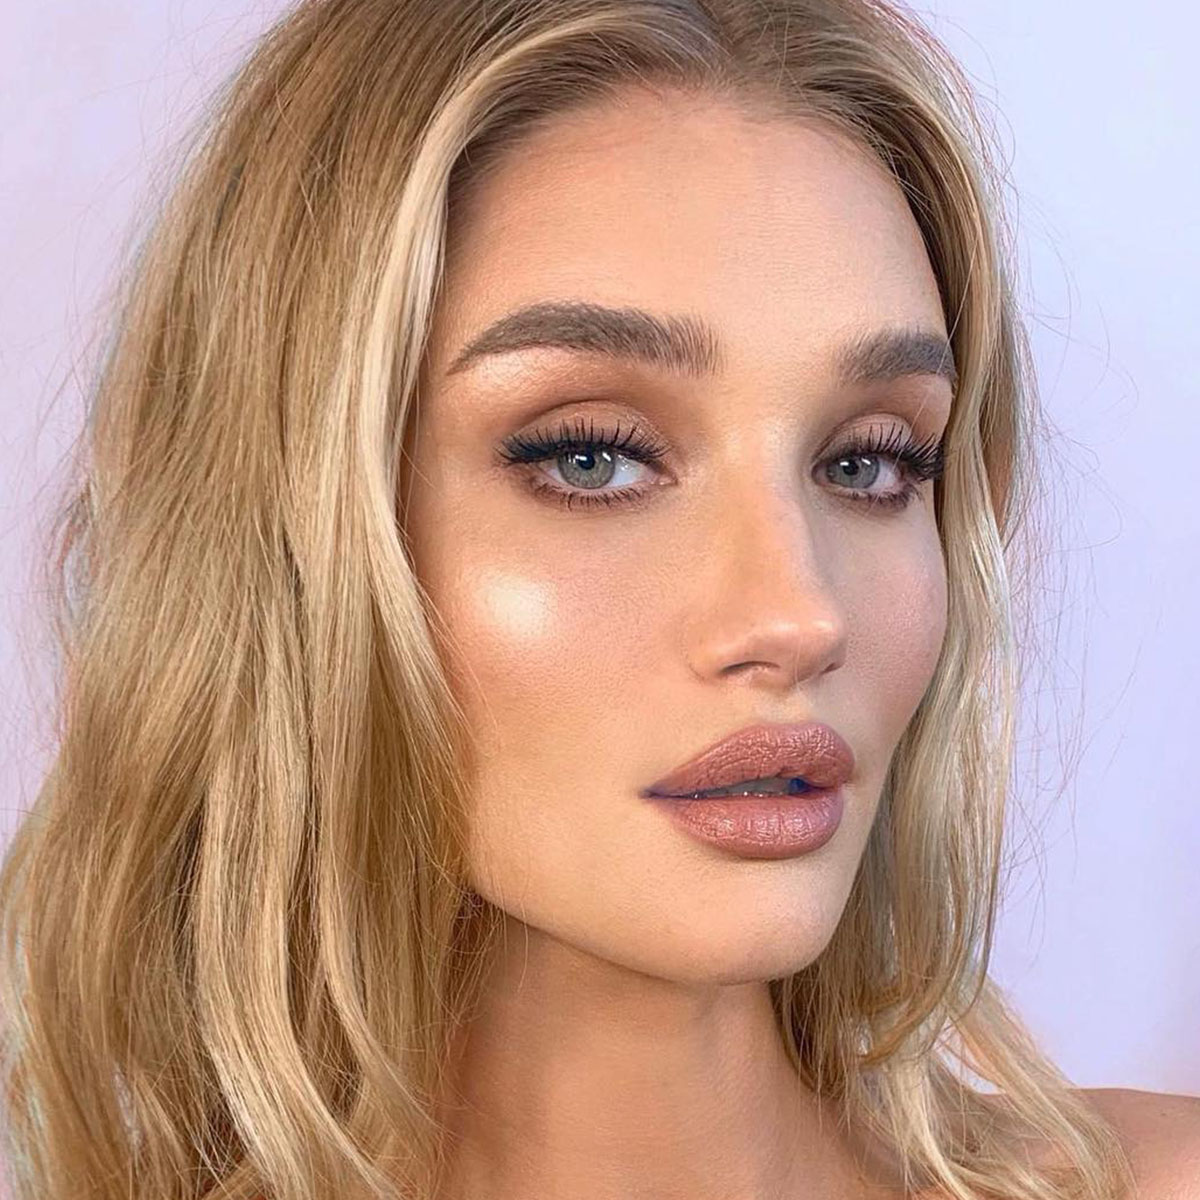 How to get better skin: Rosie Huntington-Whiteley with glowing skin